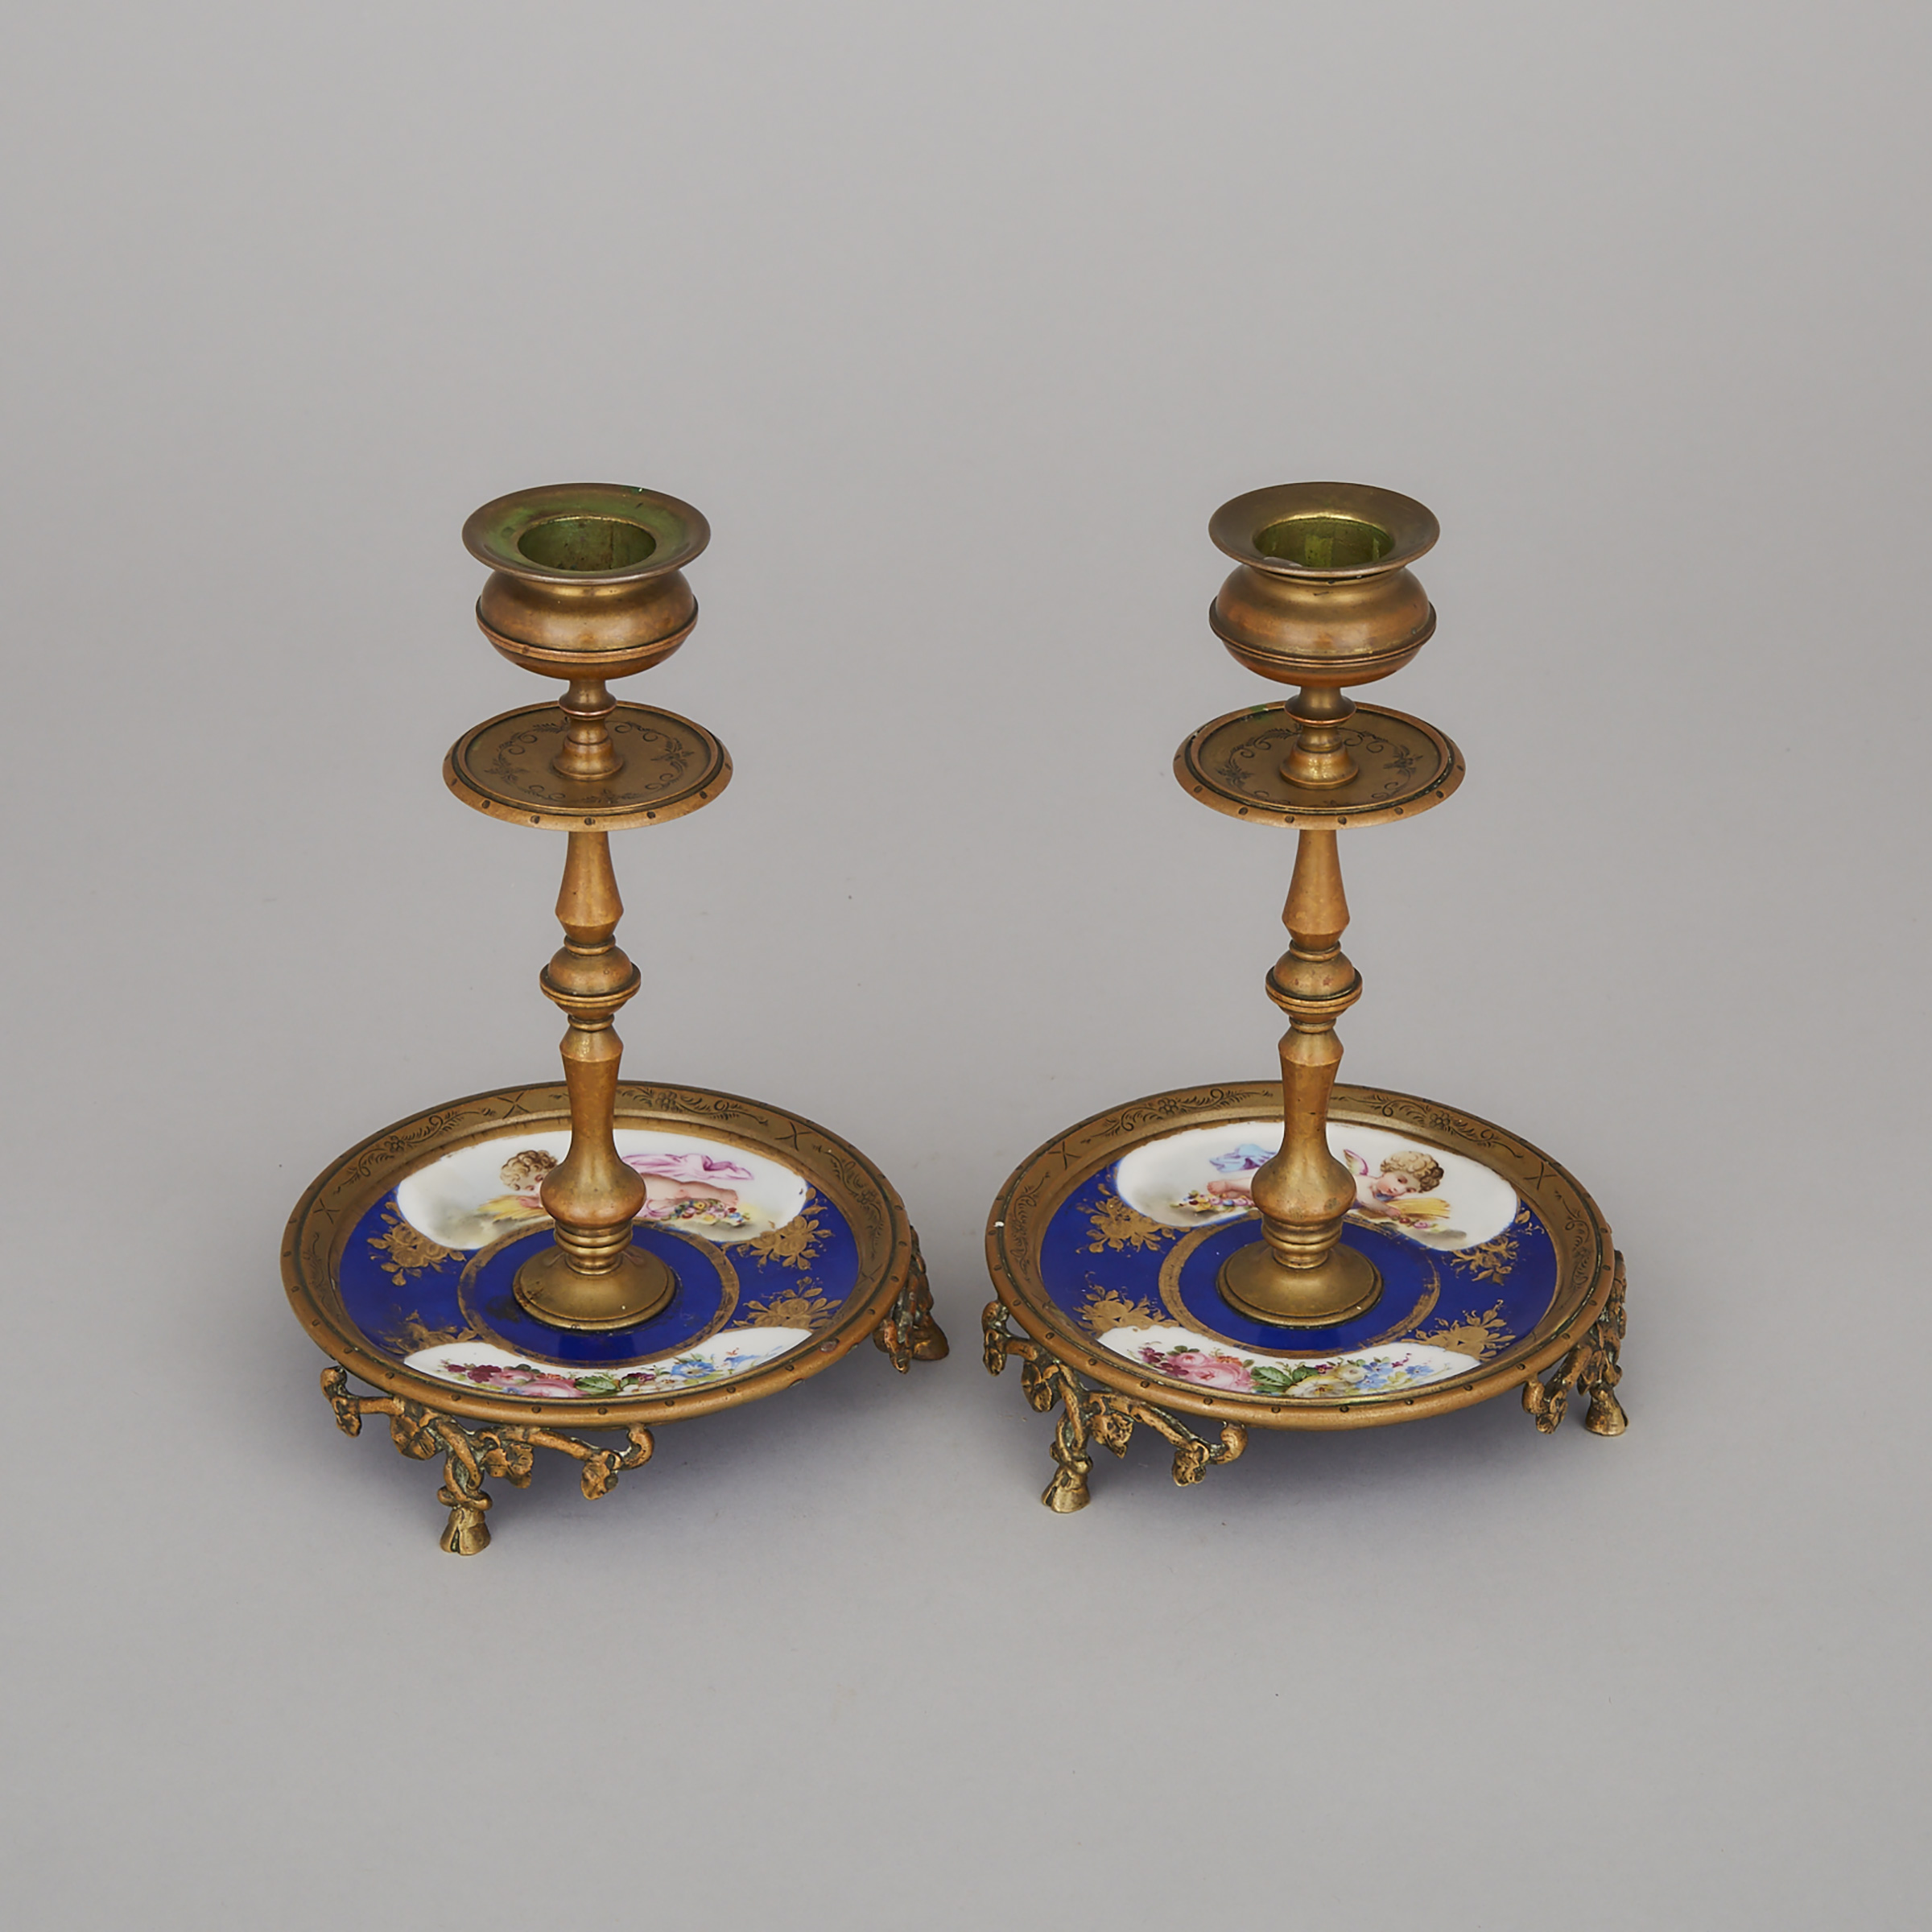 Pair of Sevres Style Porcelain Mounted Gilt Bronze Candlesticks, mid 19th century